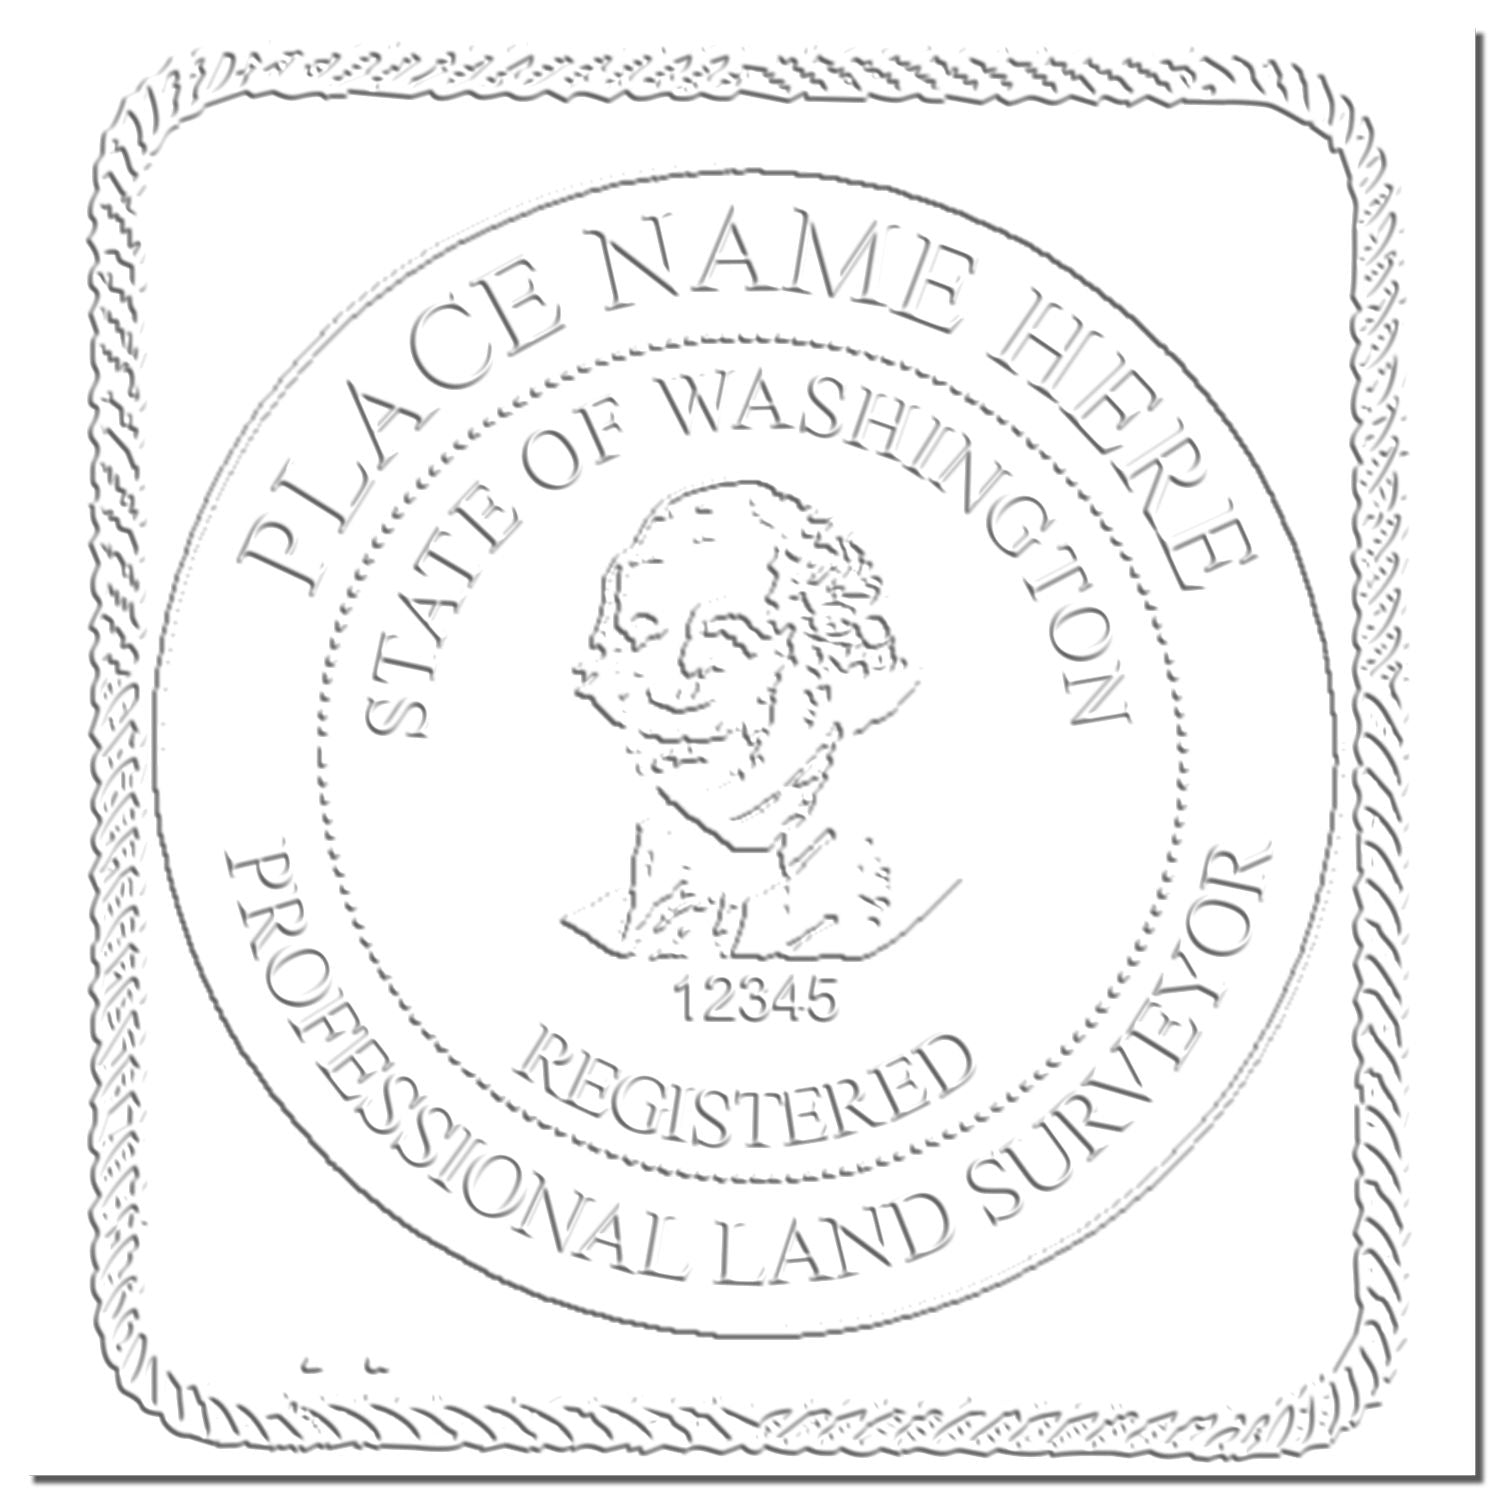 This paper is stamped with a sample imprint of the Long Reach Washington Land Surveyor Seal, signifying its quality and reliability.